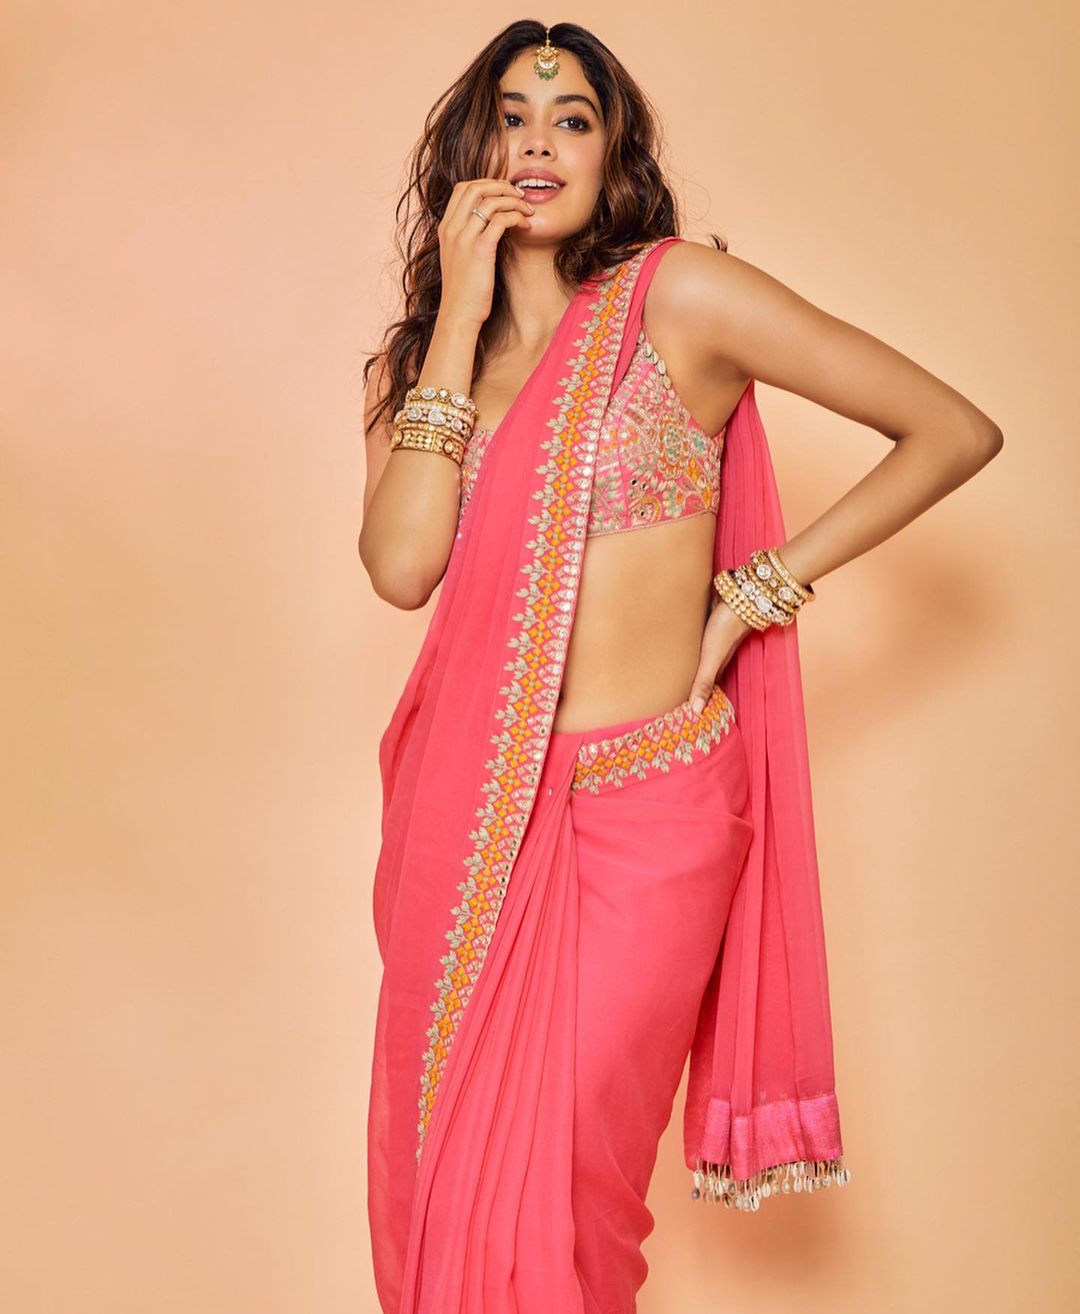 Janhvi Kapoor always sizzles in Indian ethnic wear. Seen here in a pink saree. 